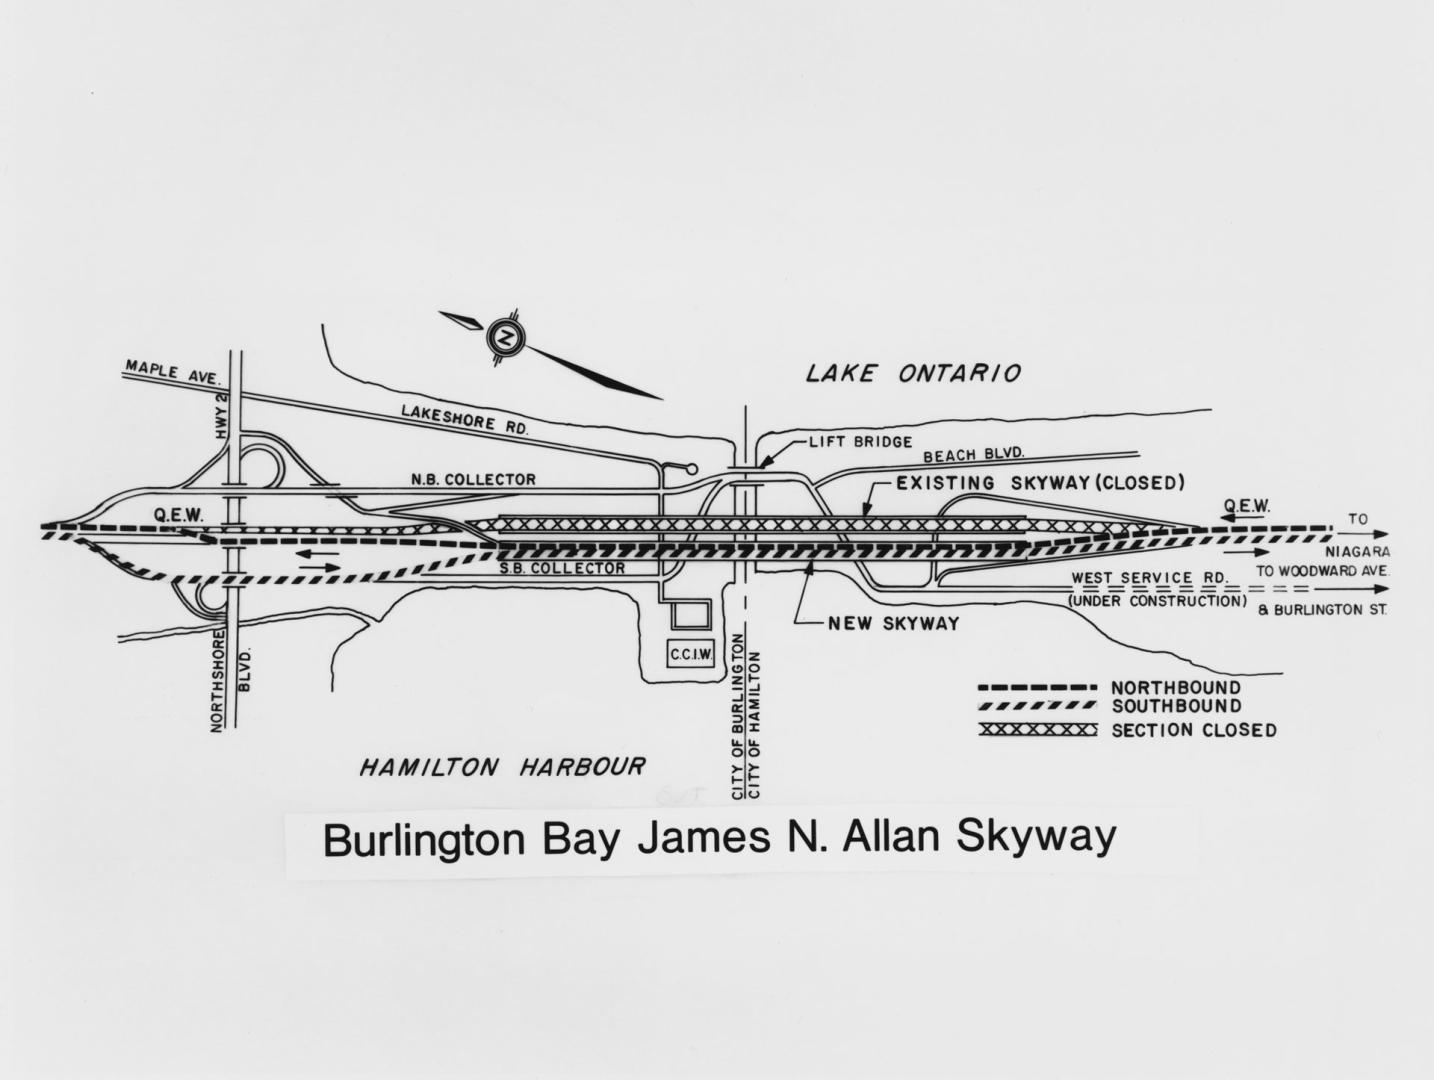 Map showing north and southbound traffic on the new skyway while the existing skyway is being restored. Burlington, Ontario